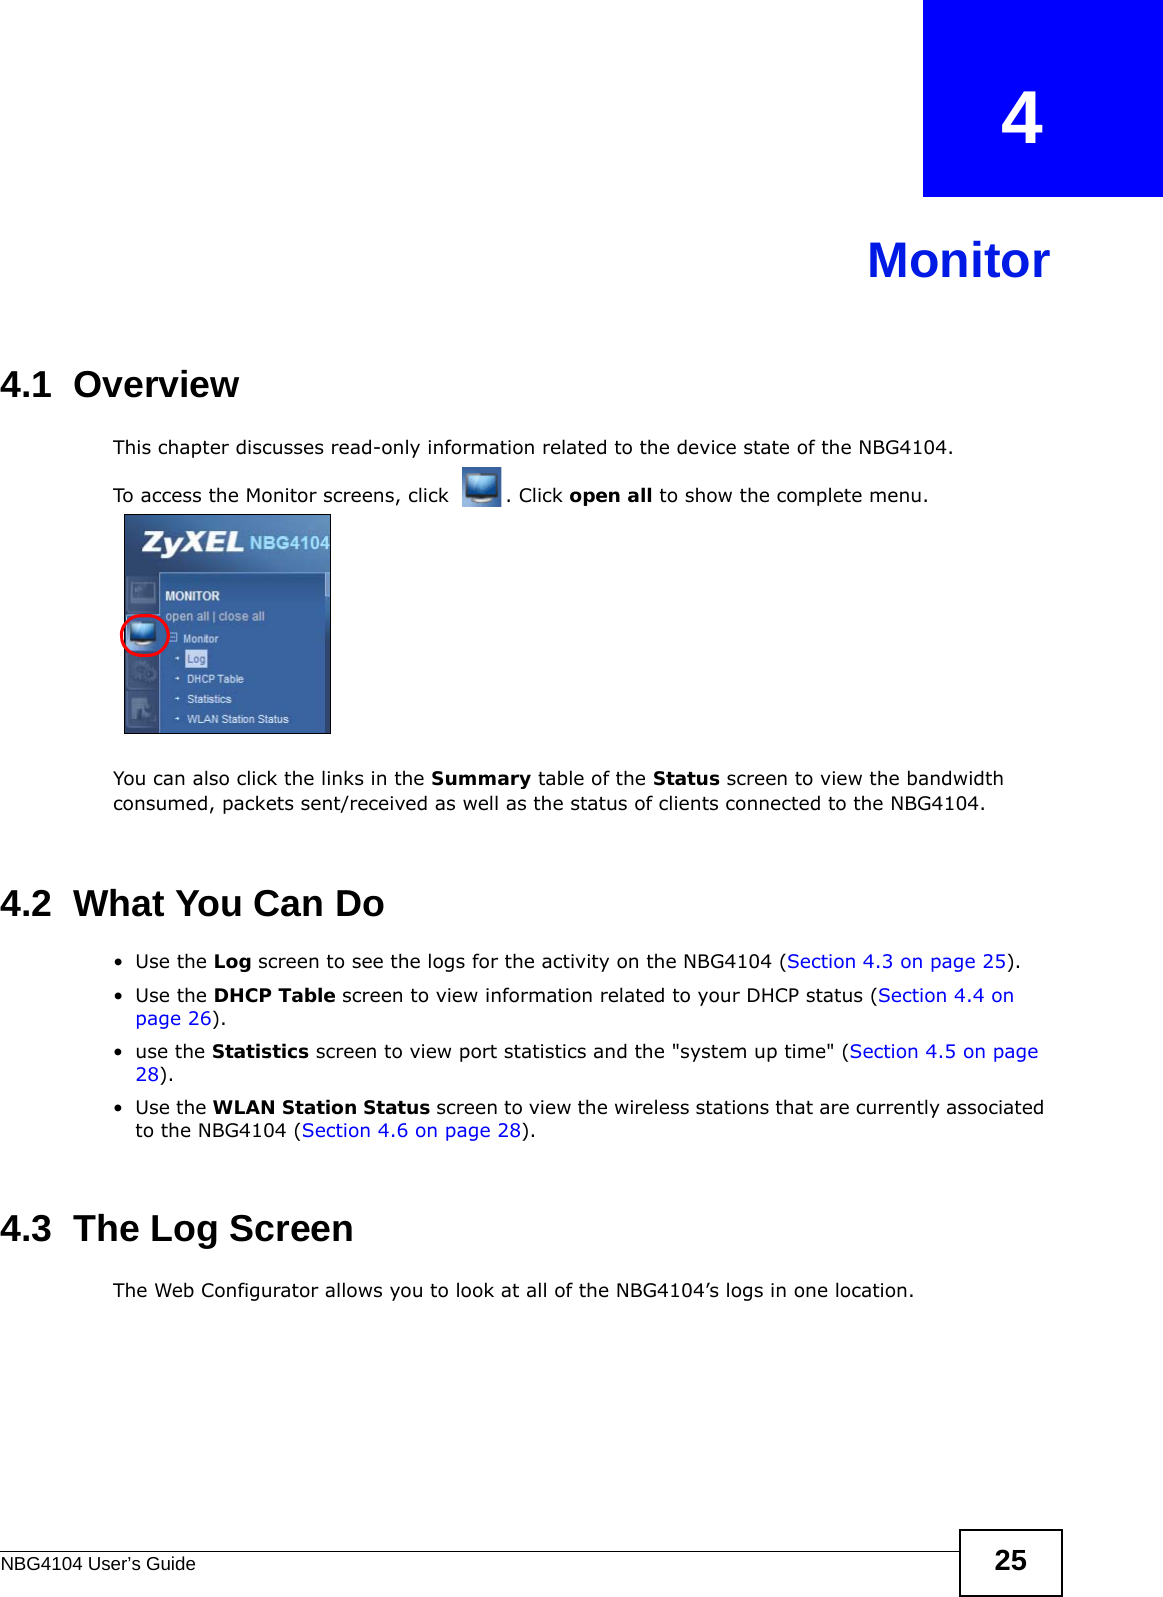 NBG4104 User’s Guide 25CHAPTER   4Monitor4.1  OverviewThis chapter discusses read-only information related to the device state of the NBG4104. To access the Monitor screens, click  . Click open all to show the complete menu.You can also click the links in the Summary table of the Status screen to view the bandwidth consumed, packets sent/received as well as the status of clients connected to the NBG4104.4.2  What You Can Do•Use the Log screen to see the logs for the activity on the NBG4104 (Section 4.3 on page 25).•Use the DHCP Table screen to view information related to your DHCP status (Section 4.4 on page 26).•use the Statistics screen to view port statistics and the &quot;system up time&quot; (Section 4.5 on page 28).•Use the WLAN Station Status screen to view the wireless stations that are currently associated to the NBG4104 (Section 4.6 on page 28).4.3  The Log ScreenThe Web Configurator allows you to look at all of the NBG4104’s logs in one location. 